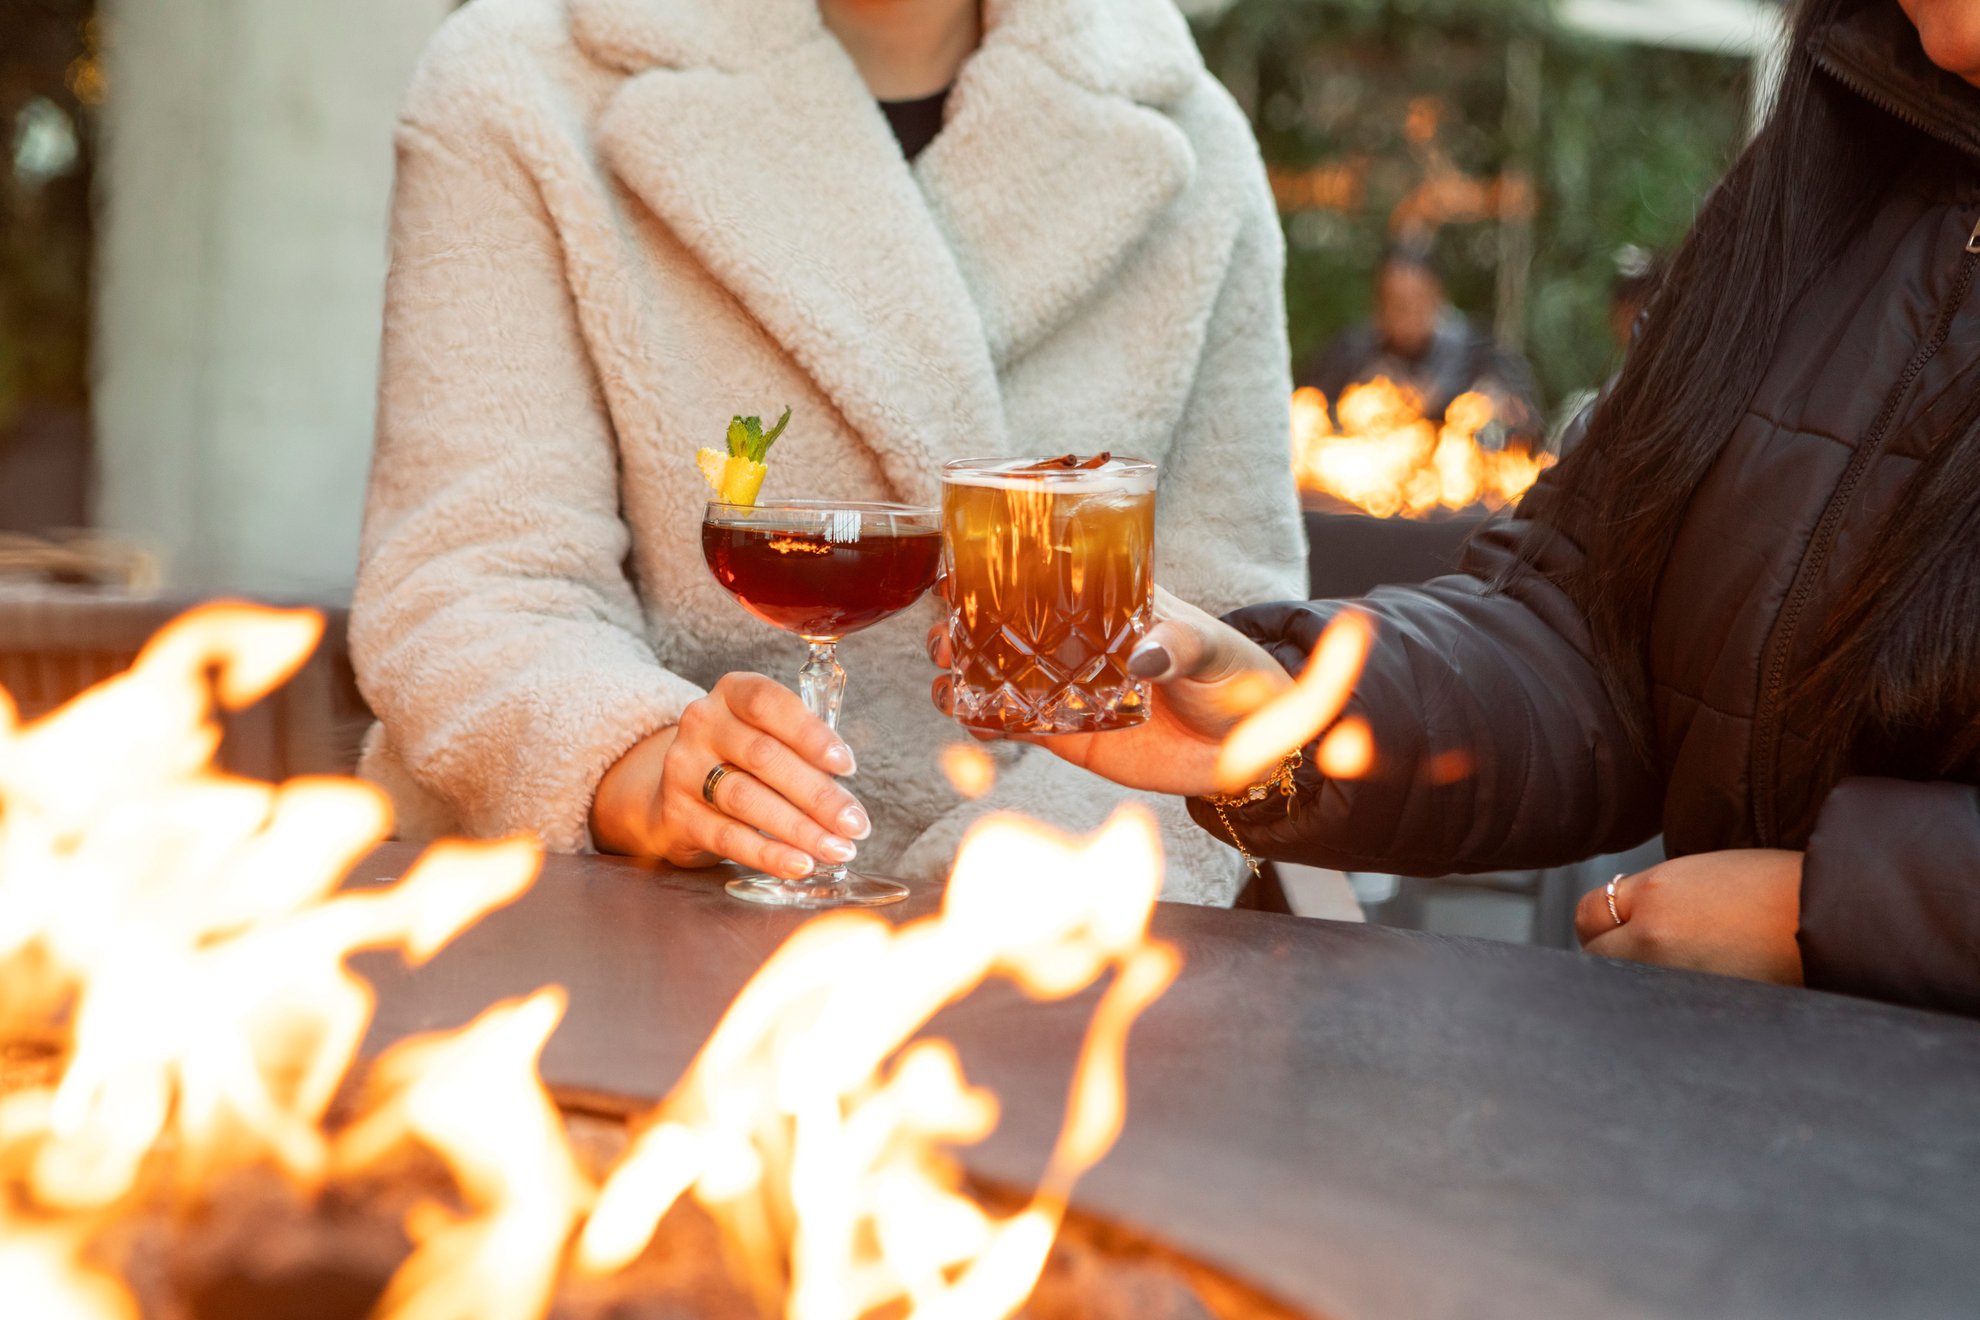 Enjoy fora chicago signature cocktail drinks and the warmth of sitting next to firepit